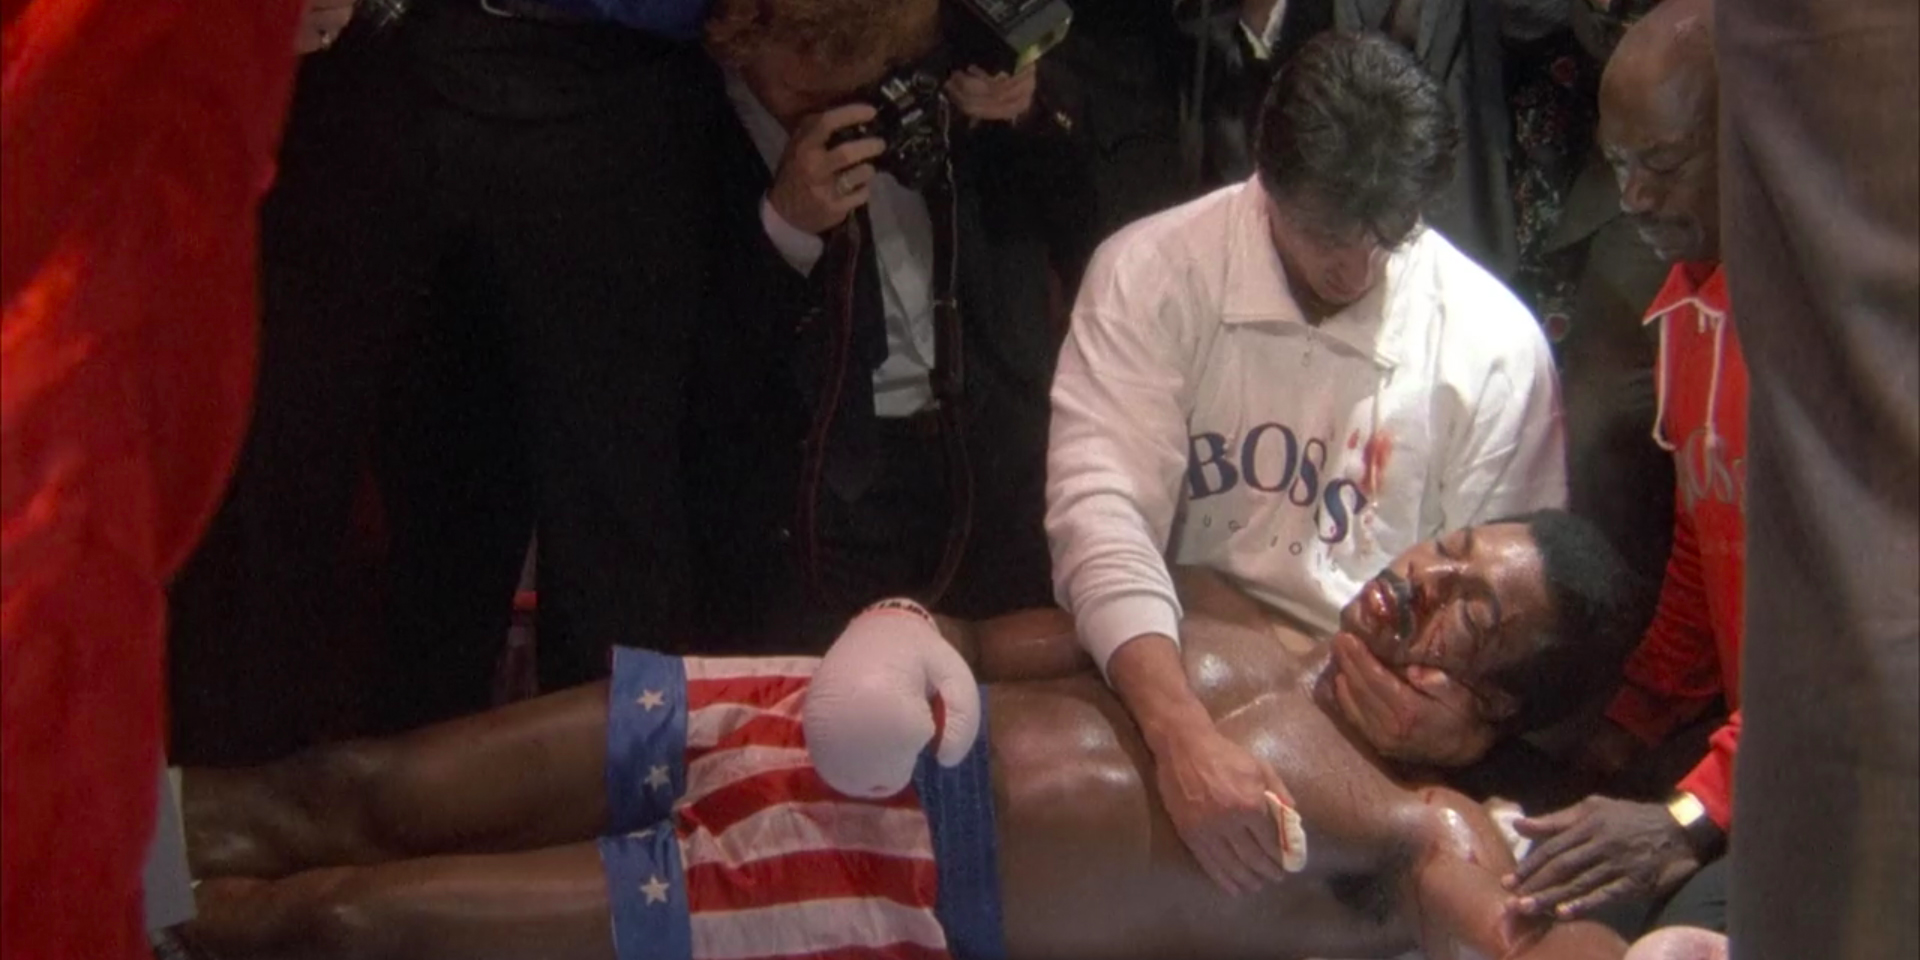 creed-dies-due-to-the-punches-he-took-from-drago-in-the-fight.jpg